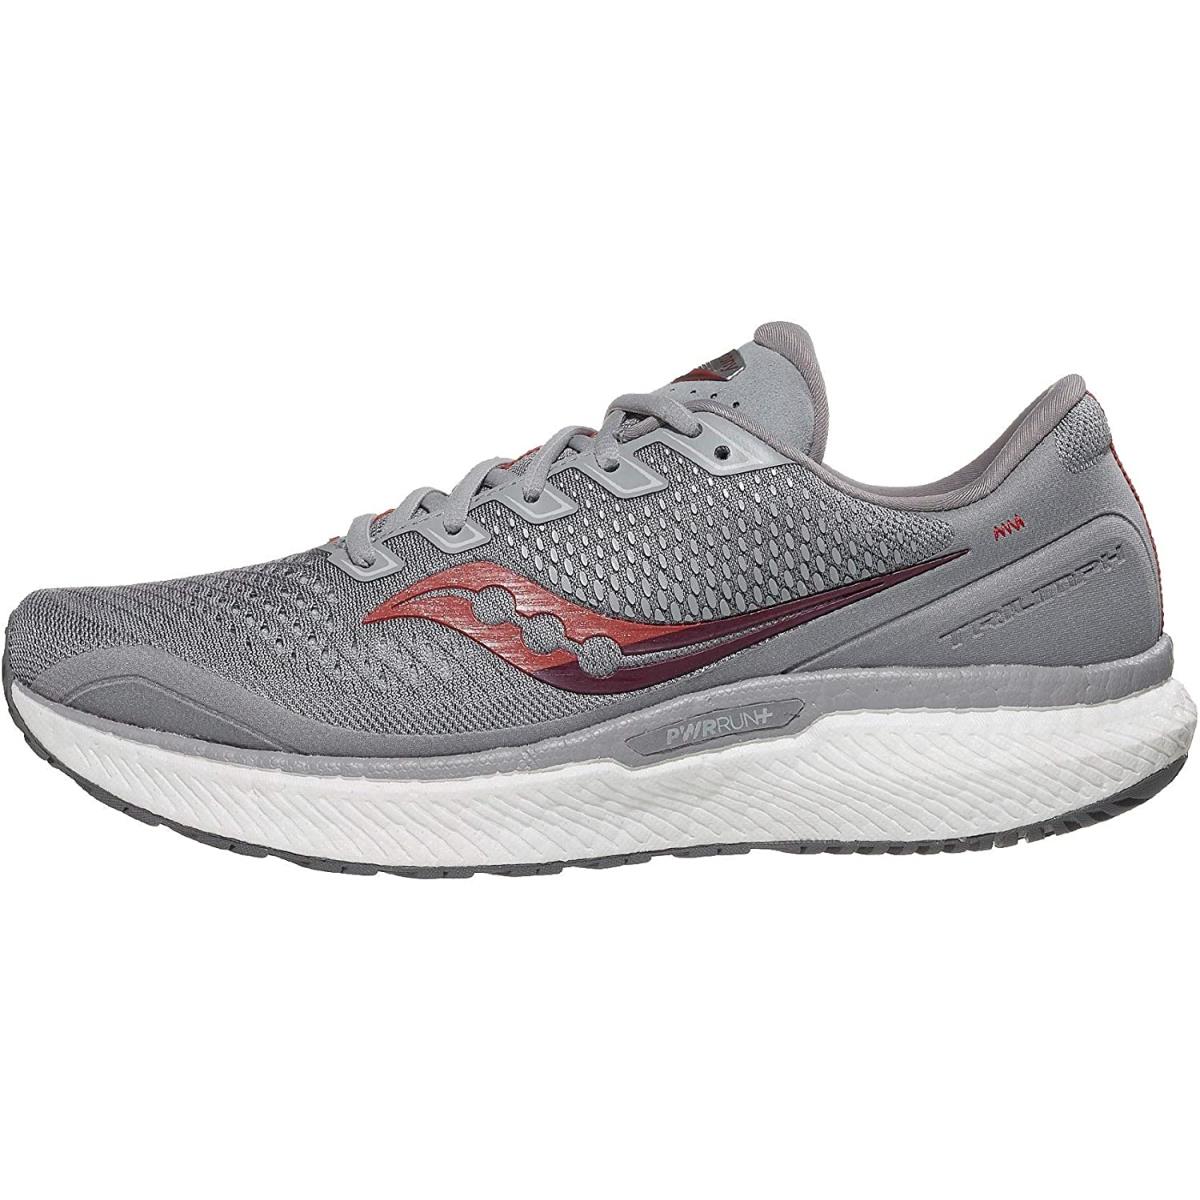 Saucony shoes  - Charcoal/White 10